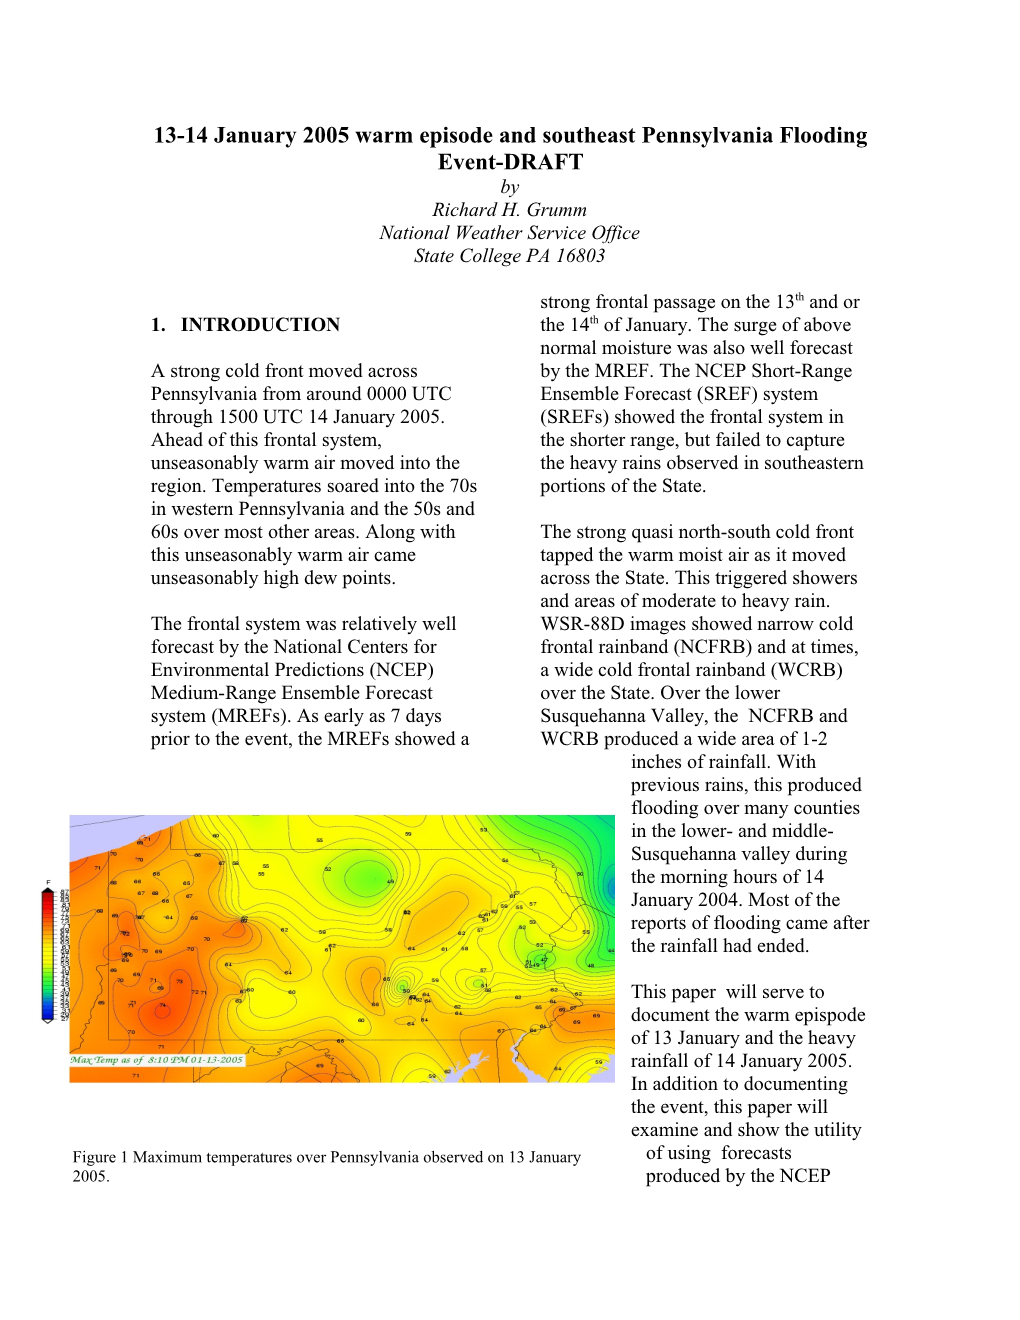 13-14 January 2005 Warm Episode and Southeast Pennsylvania Flooding Event-DRAFT